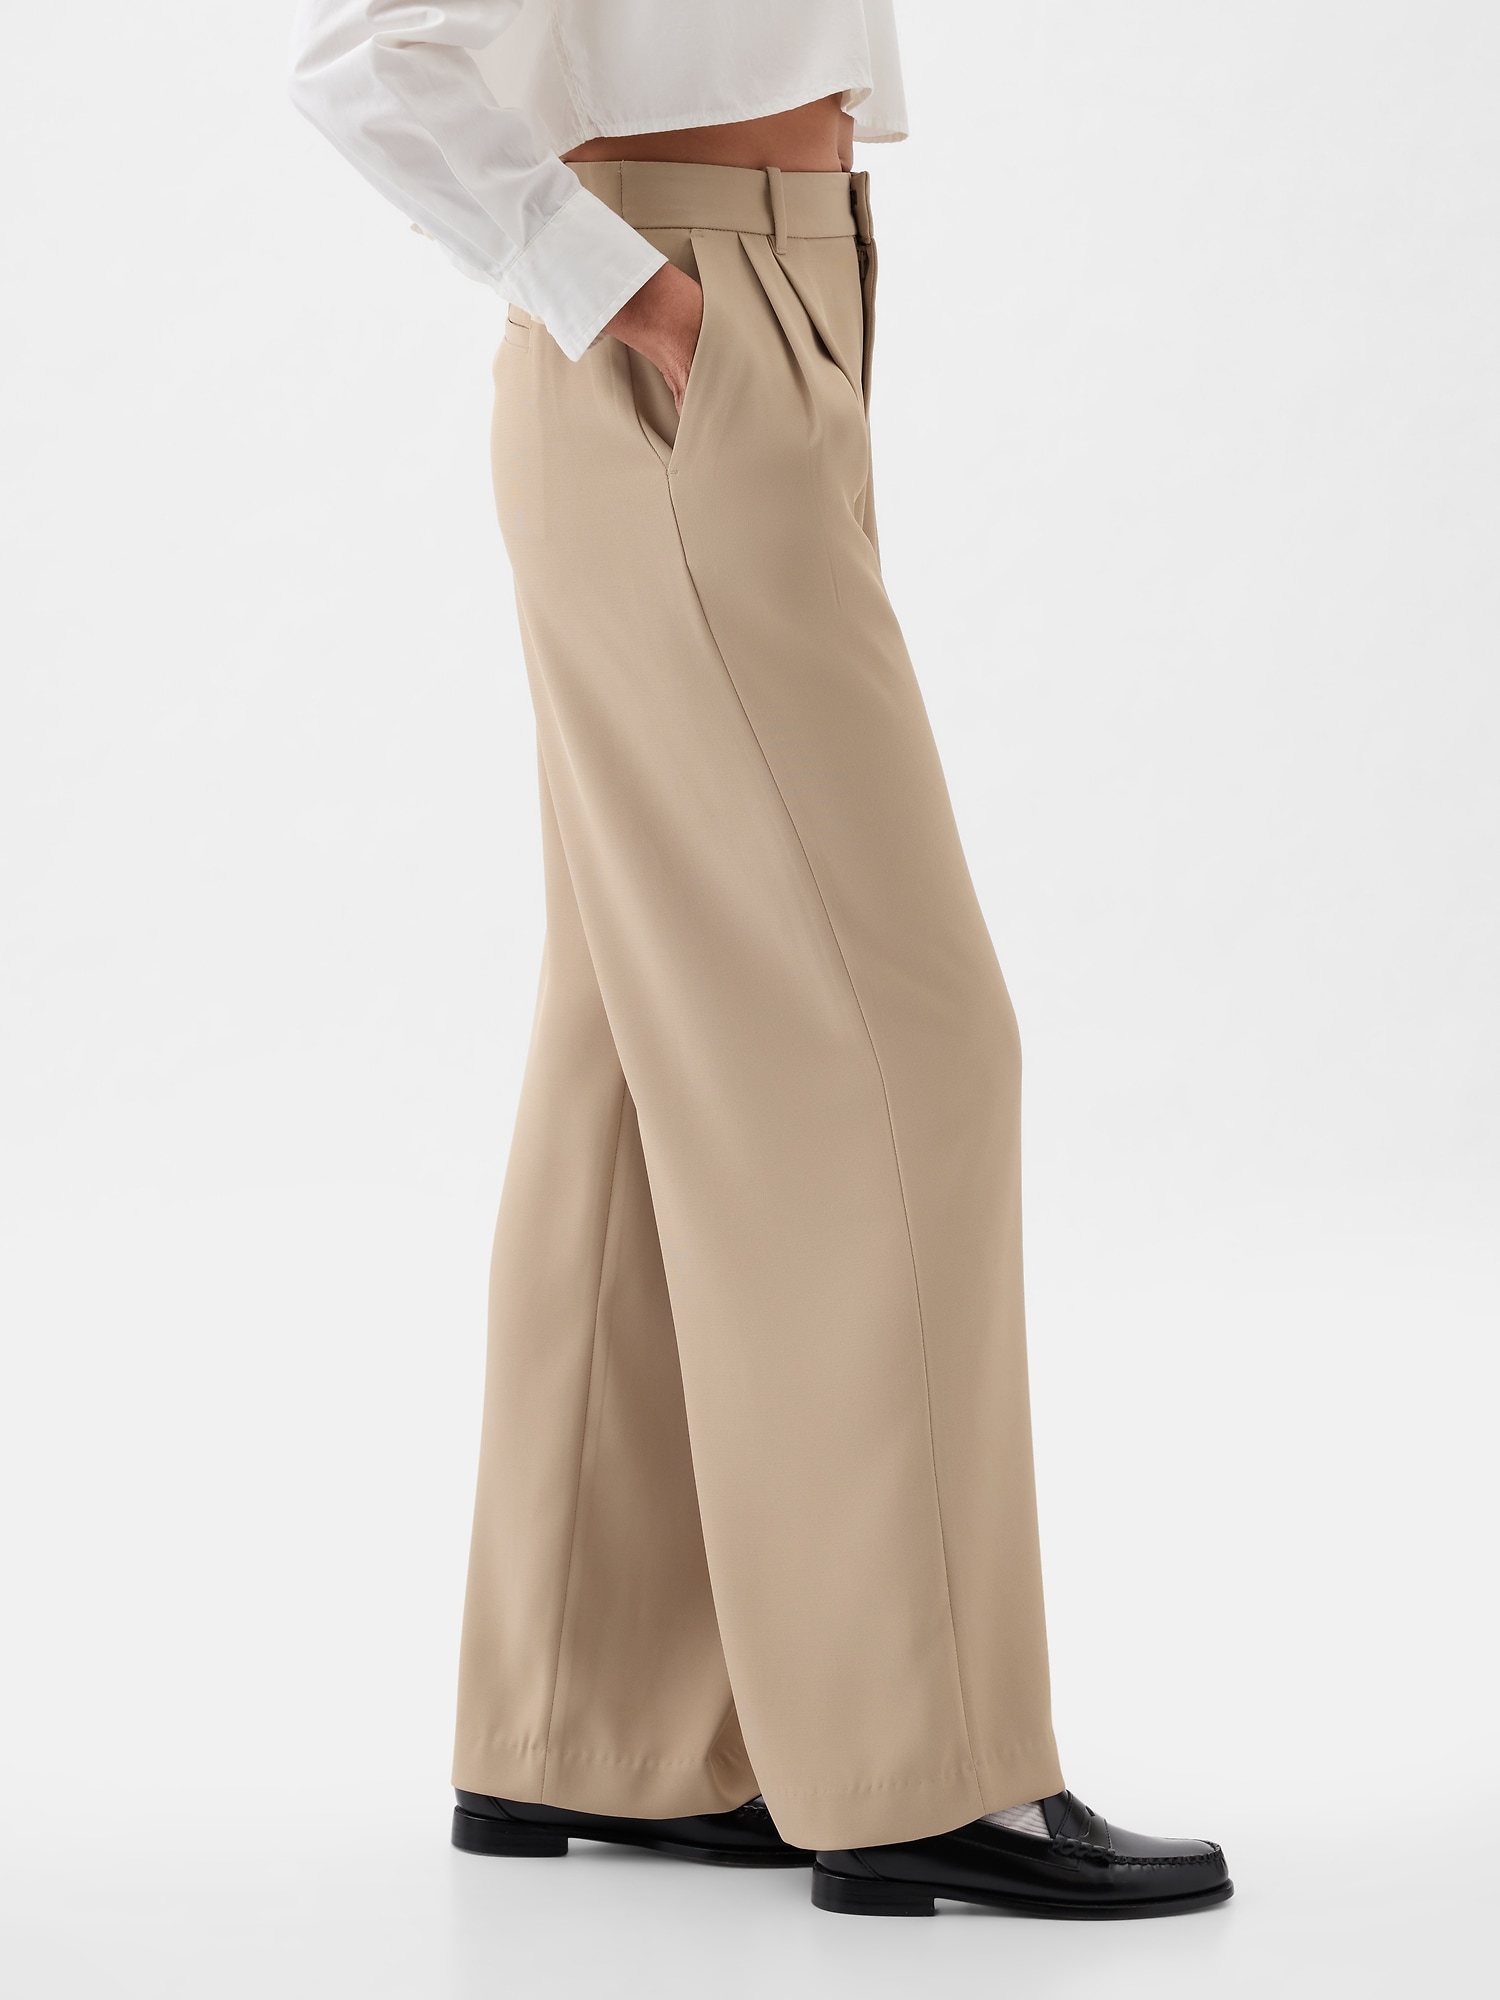 Uniqlo Wide Straight Pants Review: Effortless, Cool-Girl Trousers